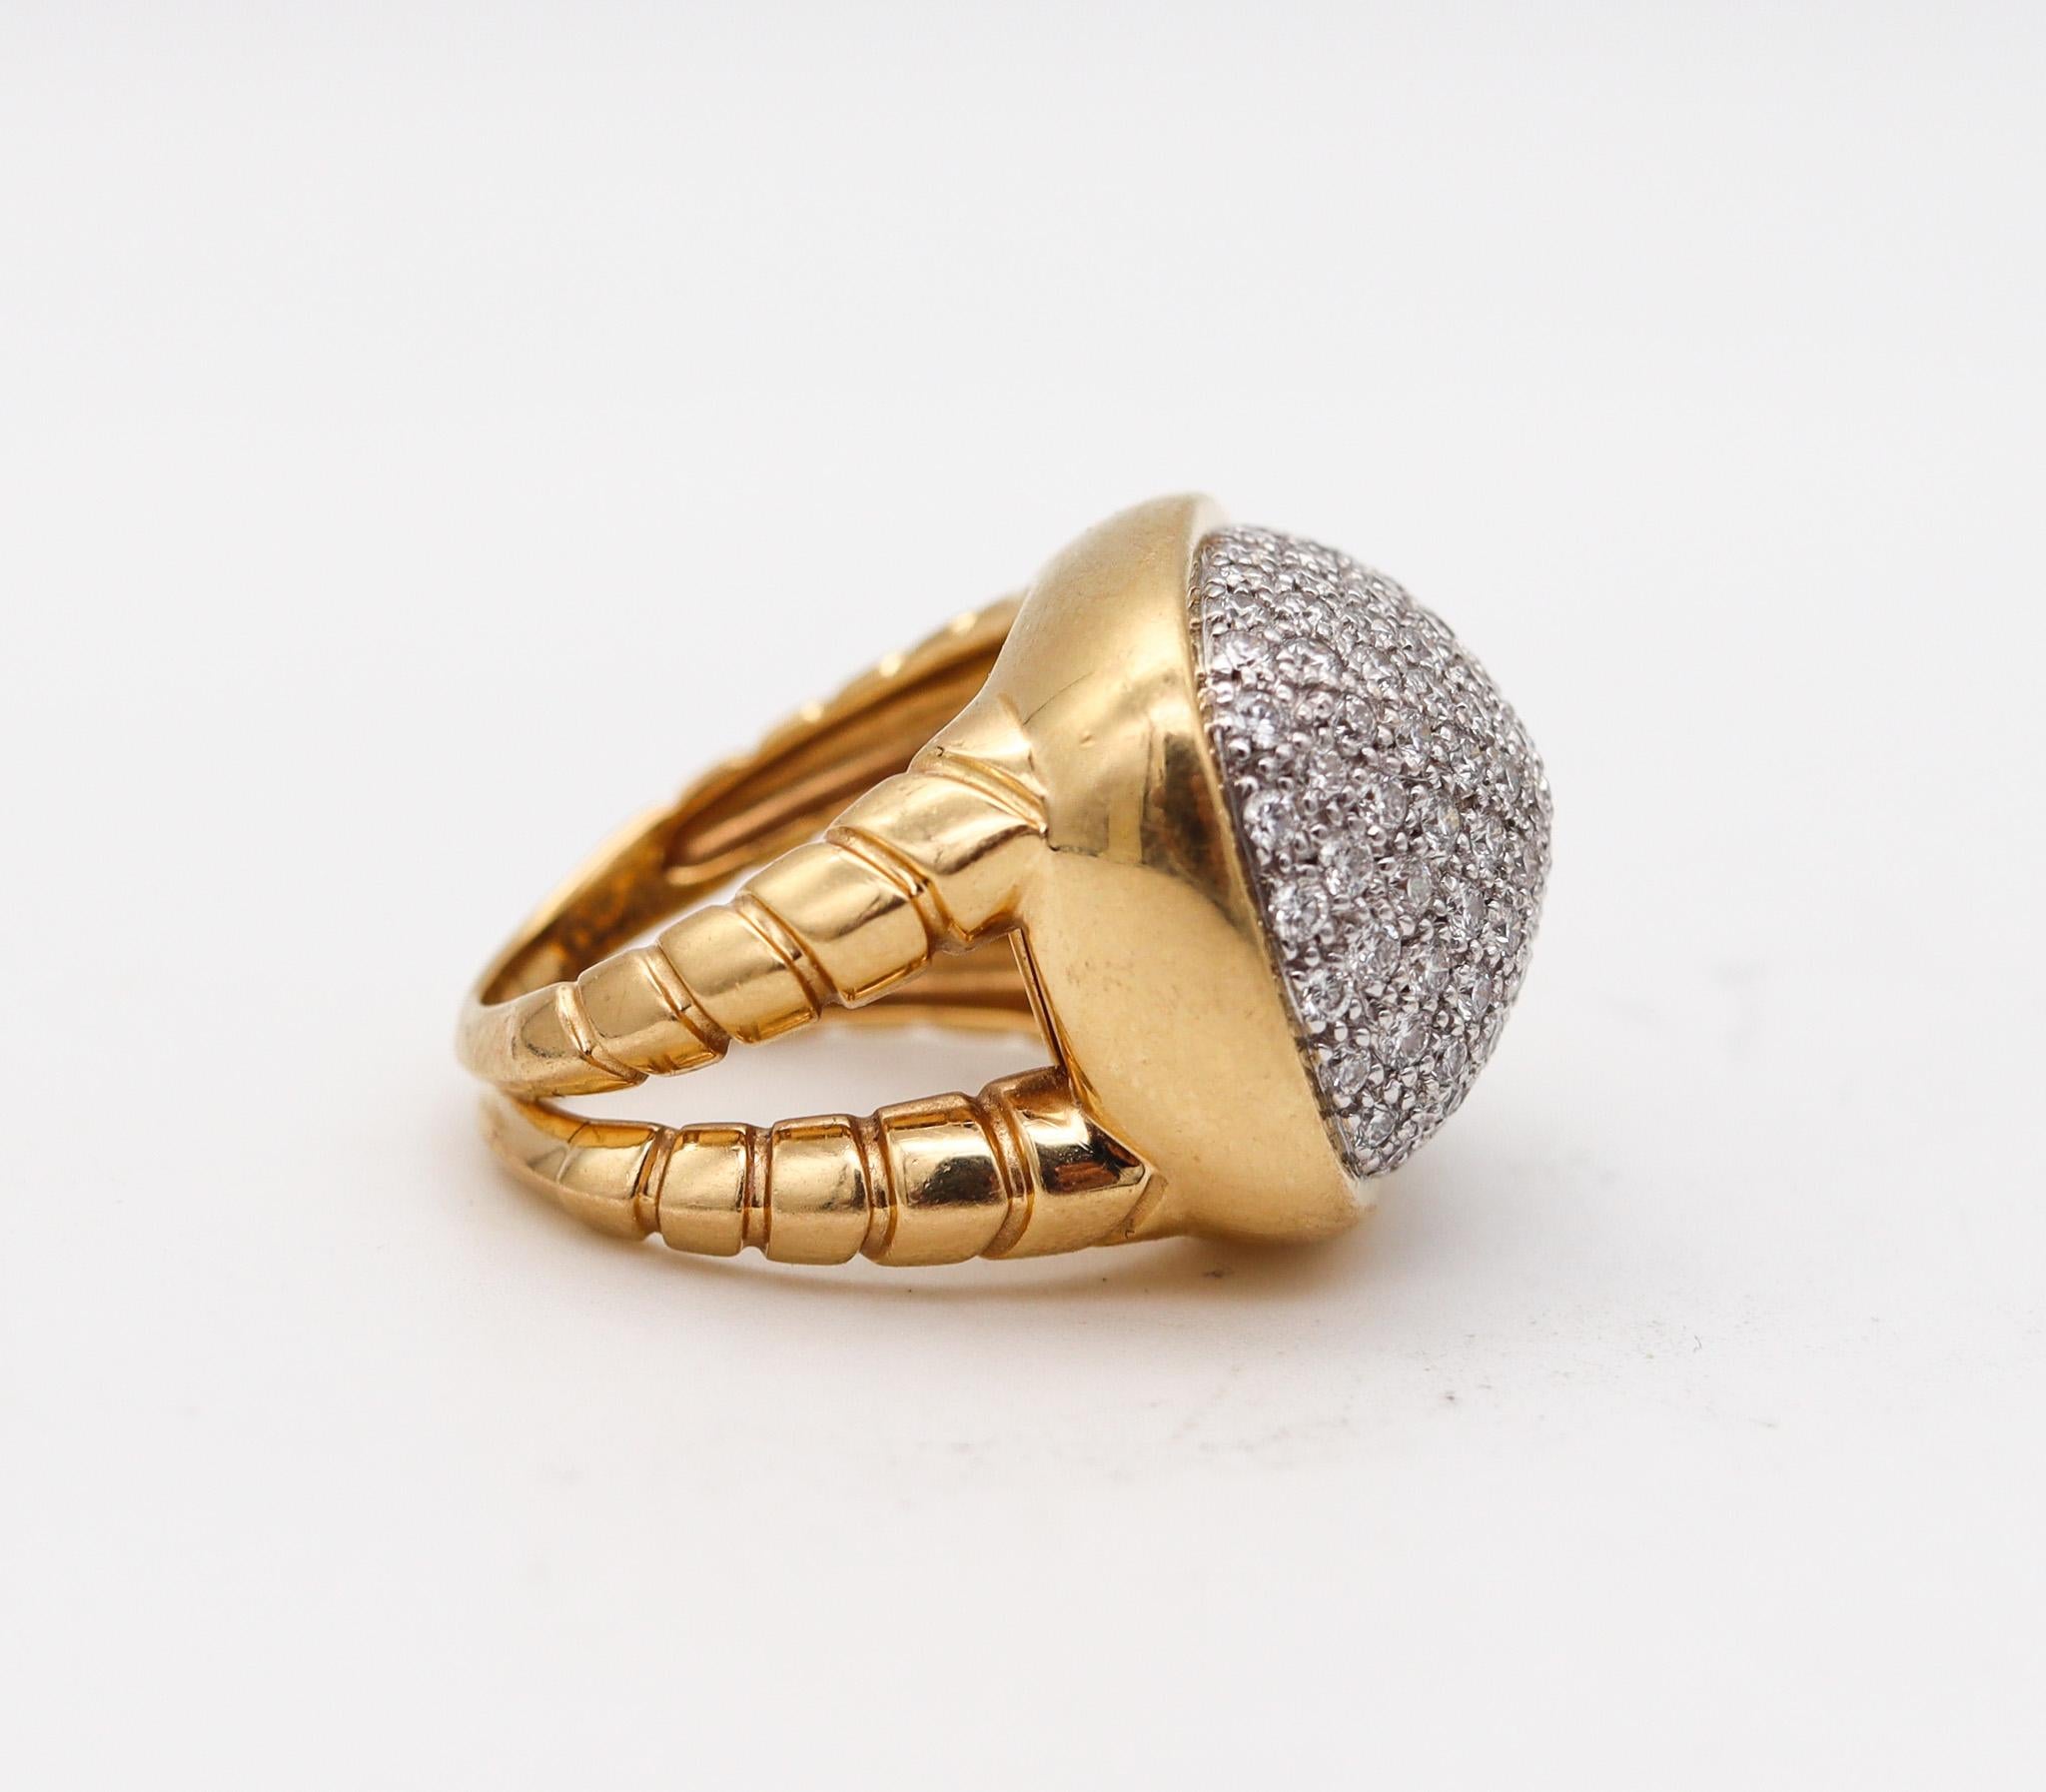 Modern Marina B. Milano Tiguella Pave Cocktail Ring in 18kt Gold with 2.55ctw Diamonds For Sale